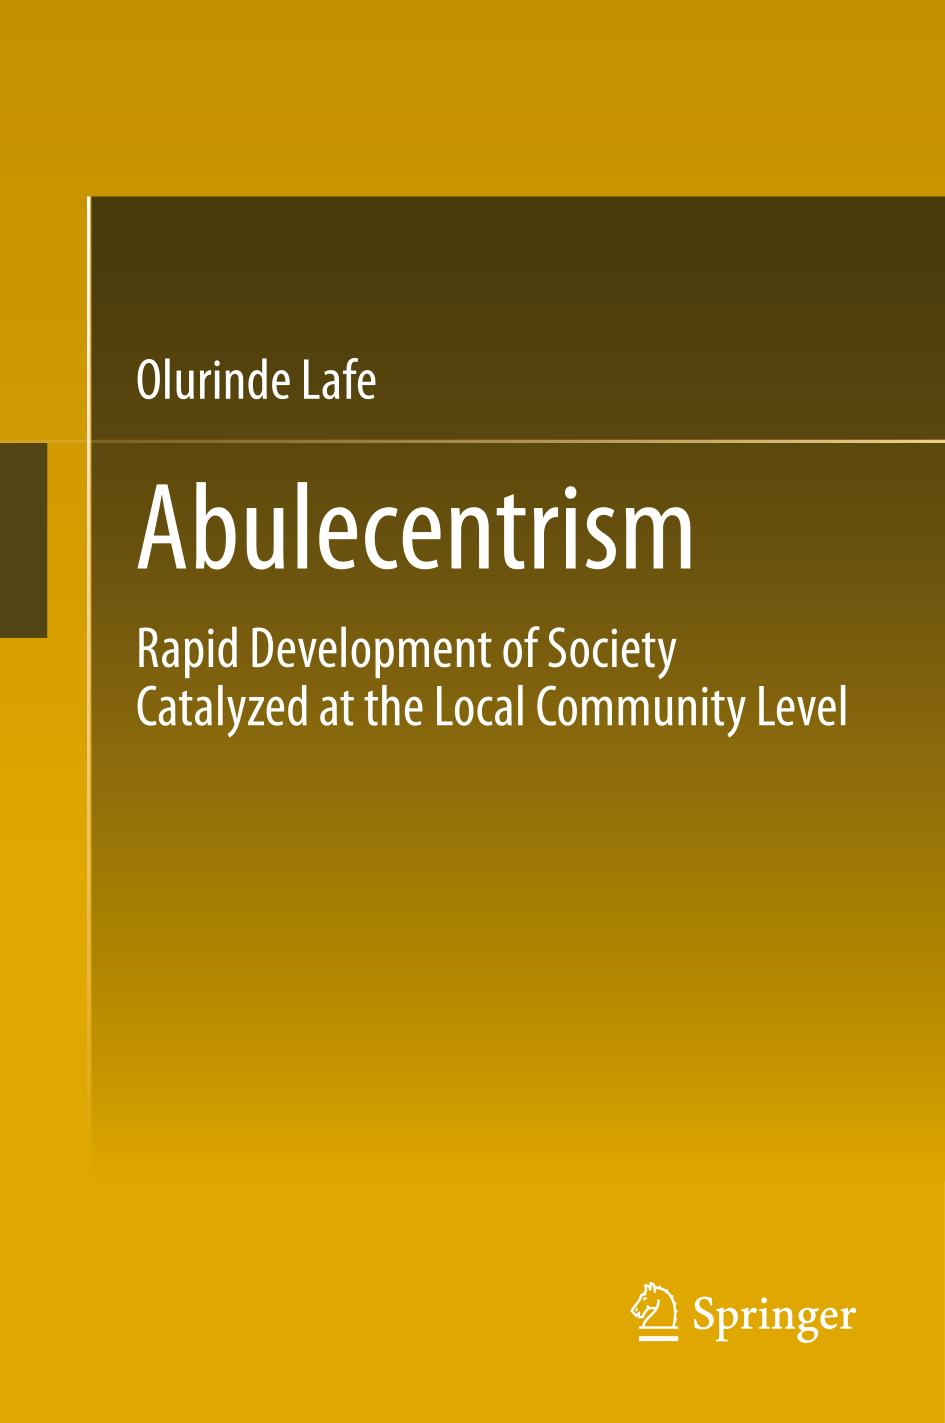 Abulecentrism Rapid Development of Society Catalyzed at the Local Community Level